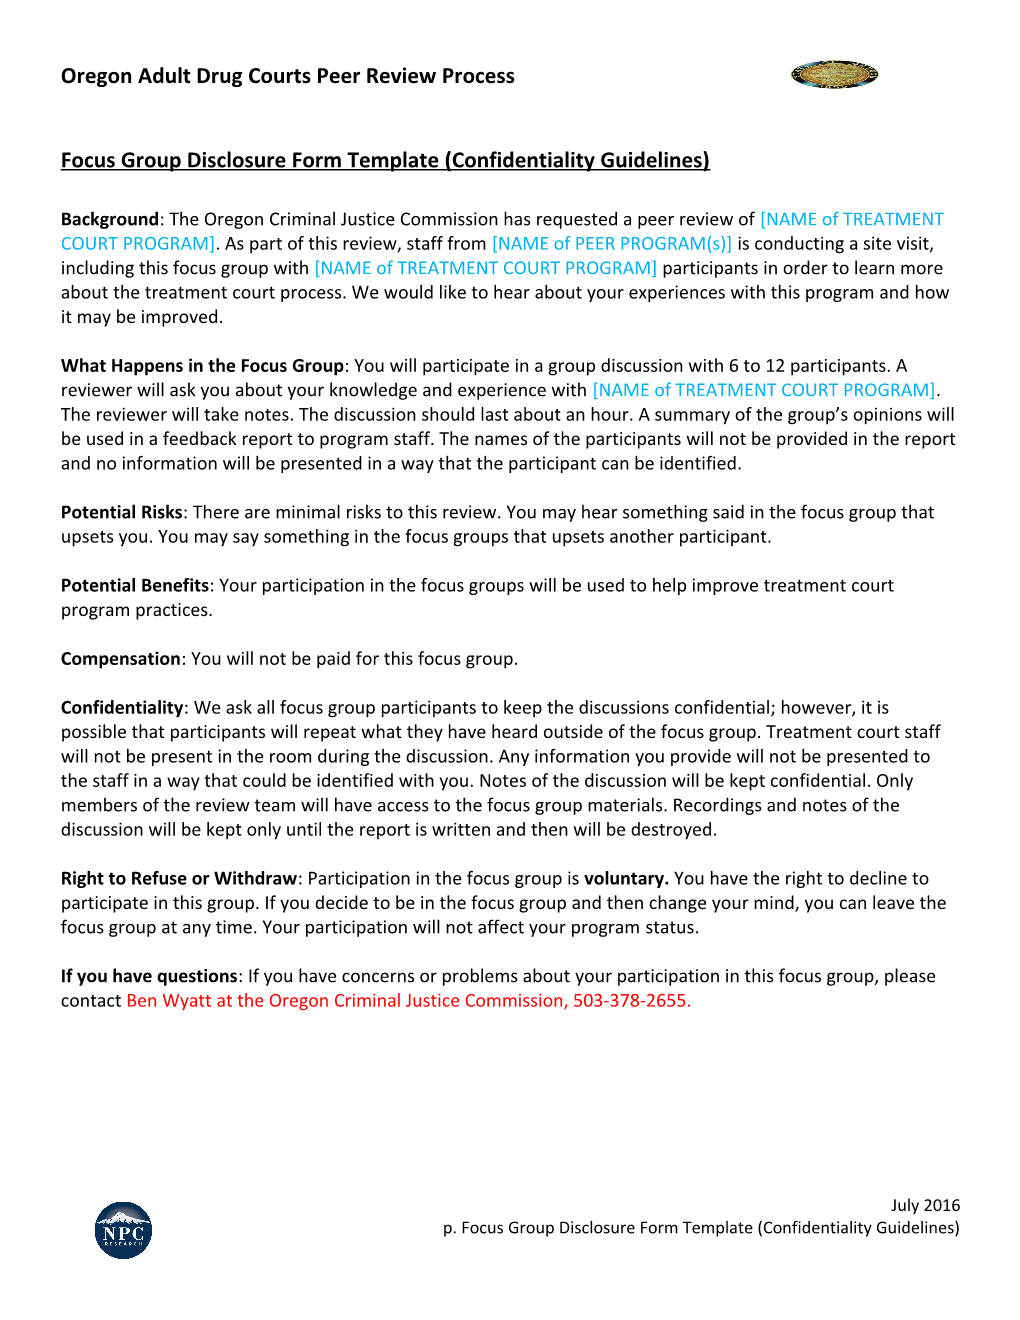 Focus Group Disclosure Form Template (Confidentiality Guidelines)